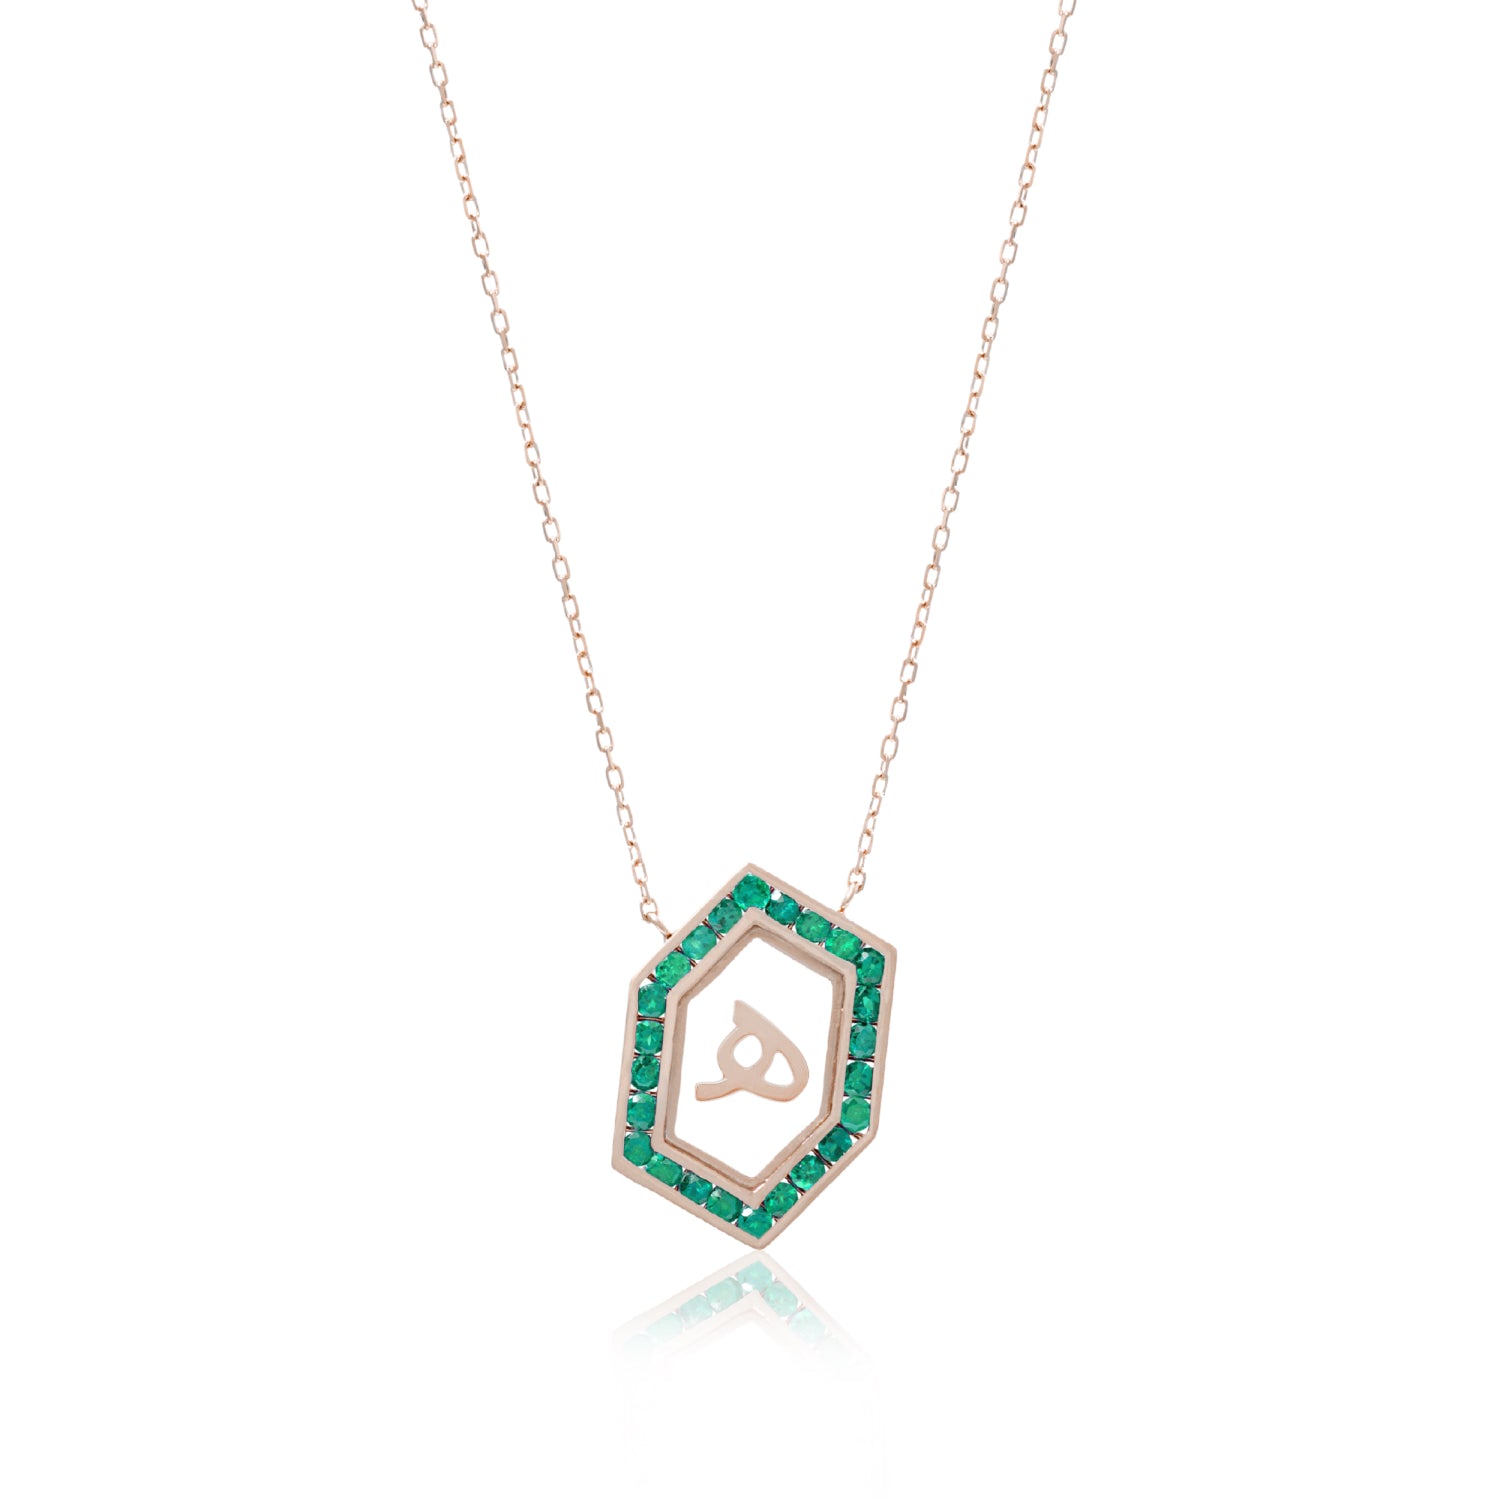 Qamoos 1.0 Letter هـ Emerald Necklace in Rose Gold